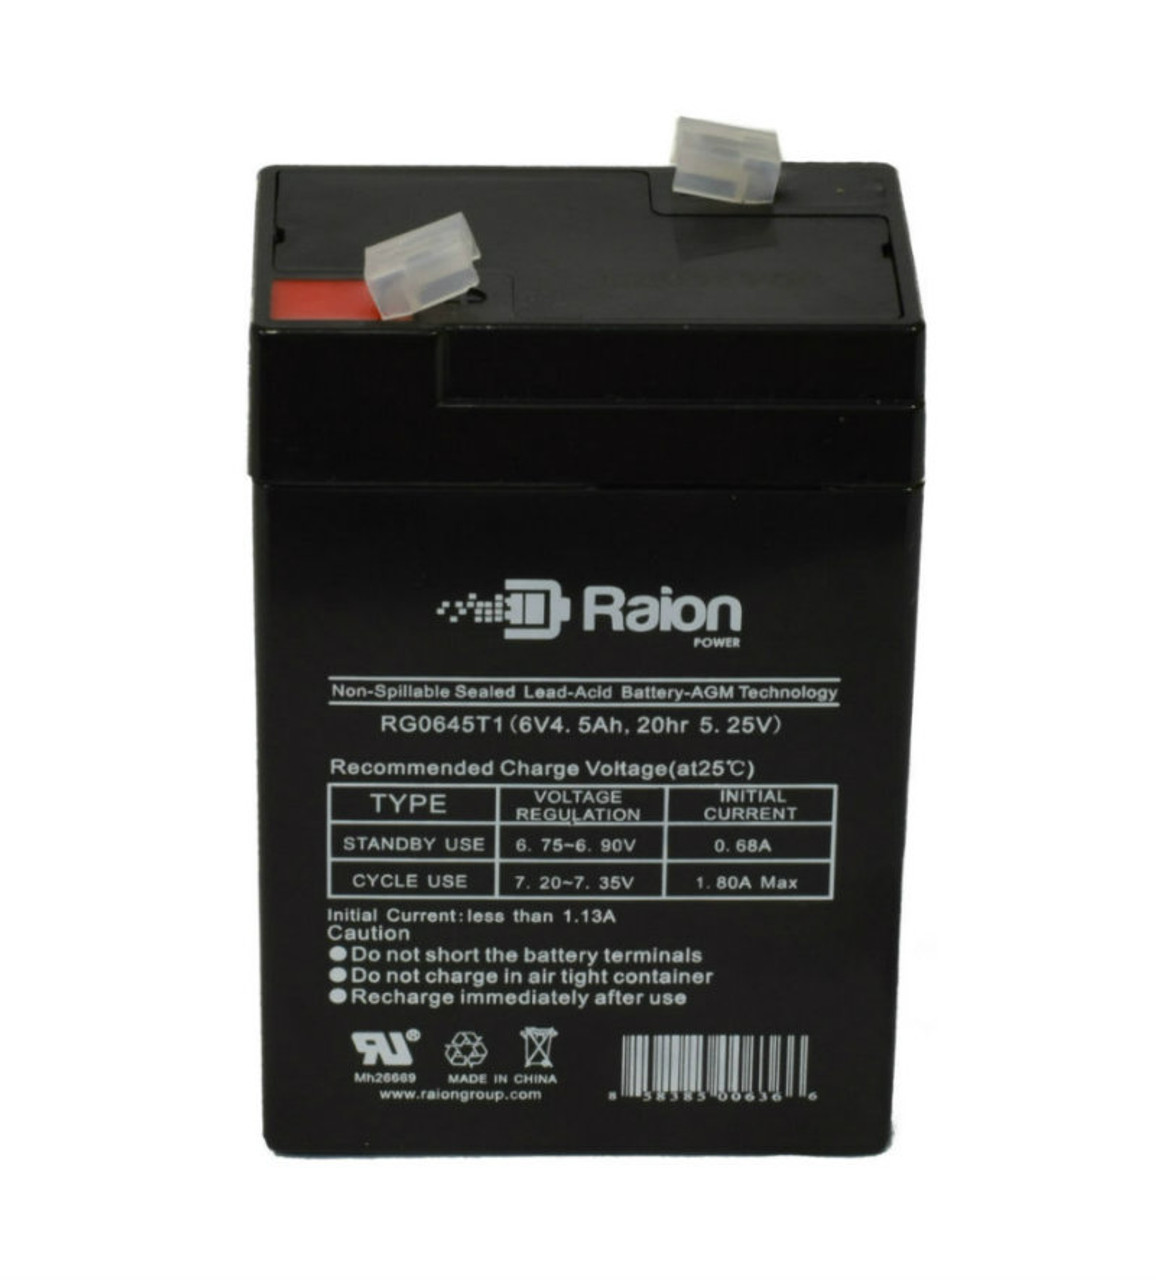 Raion Power RG0645T1 Replacement Battery Cartridge for B. Braun Micro Rate Infusion Pump